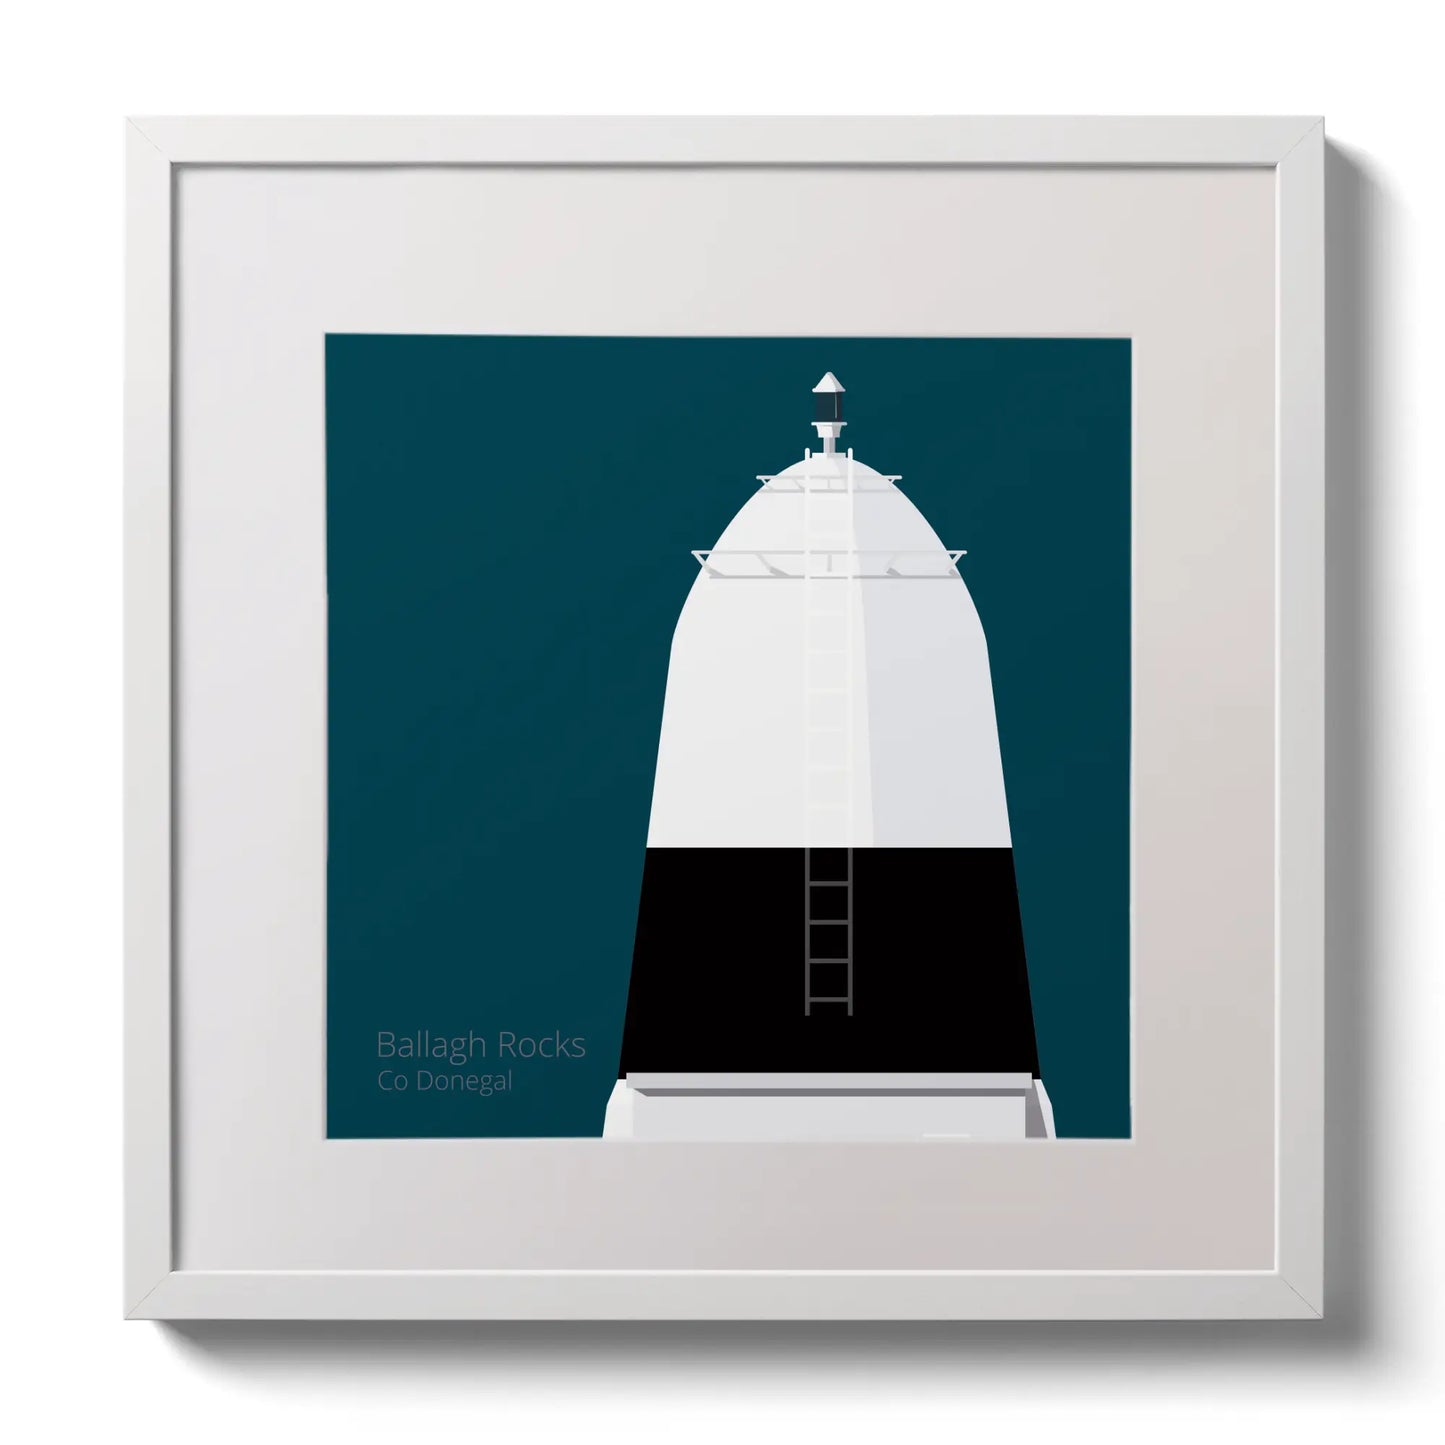 Illustration Ballagh Rocks lighthouse on a midnight blue background,  in a white square frame measuring 30x30cm.